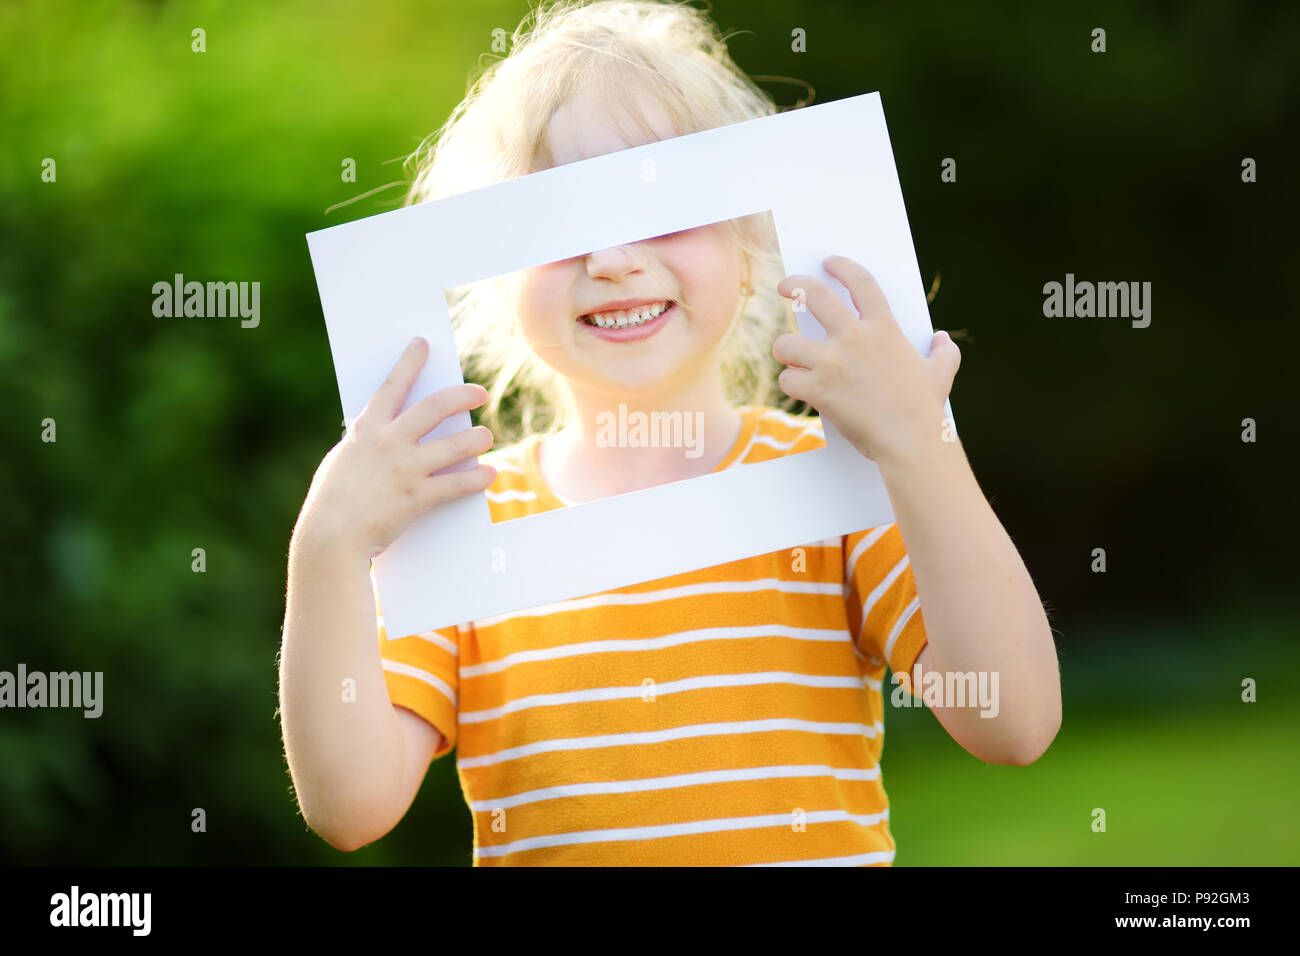 Cute cheerful little girl holding white picture frame in front of her face. Adorable child framing her smiling face. Stock Photo